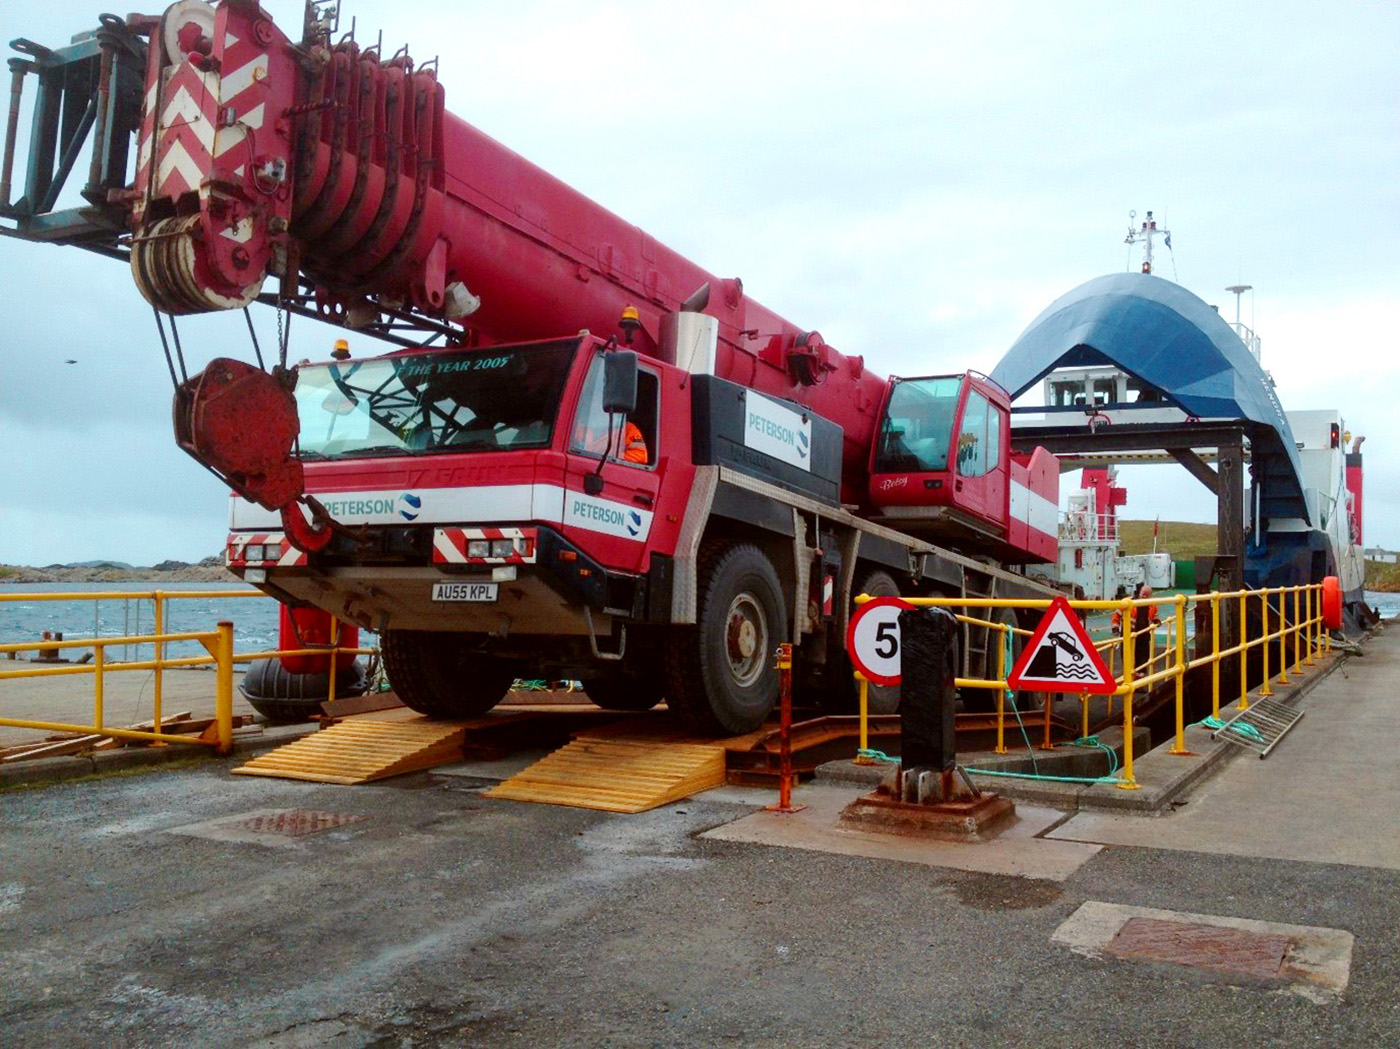 Carrying out refurbishment of the jetty case civil and structural engineering project skerries temporary access bridge